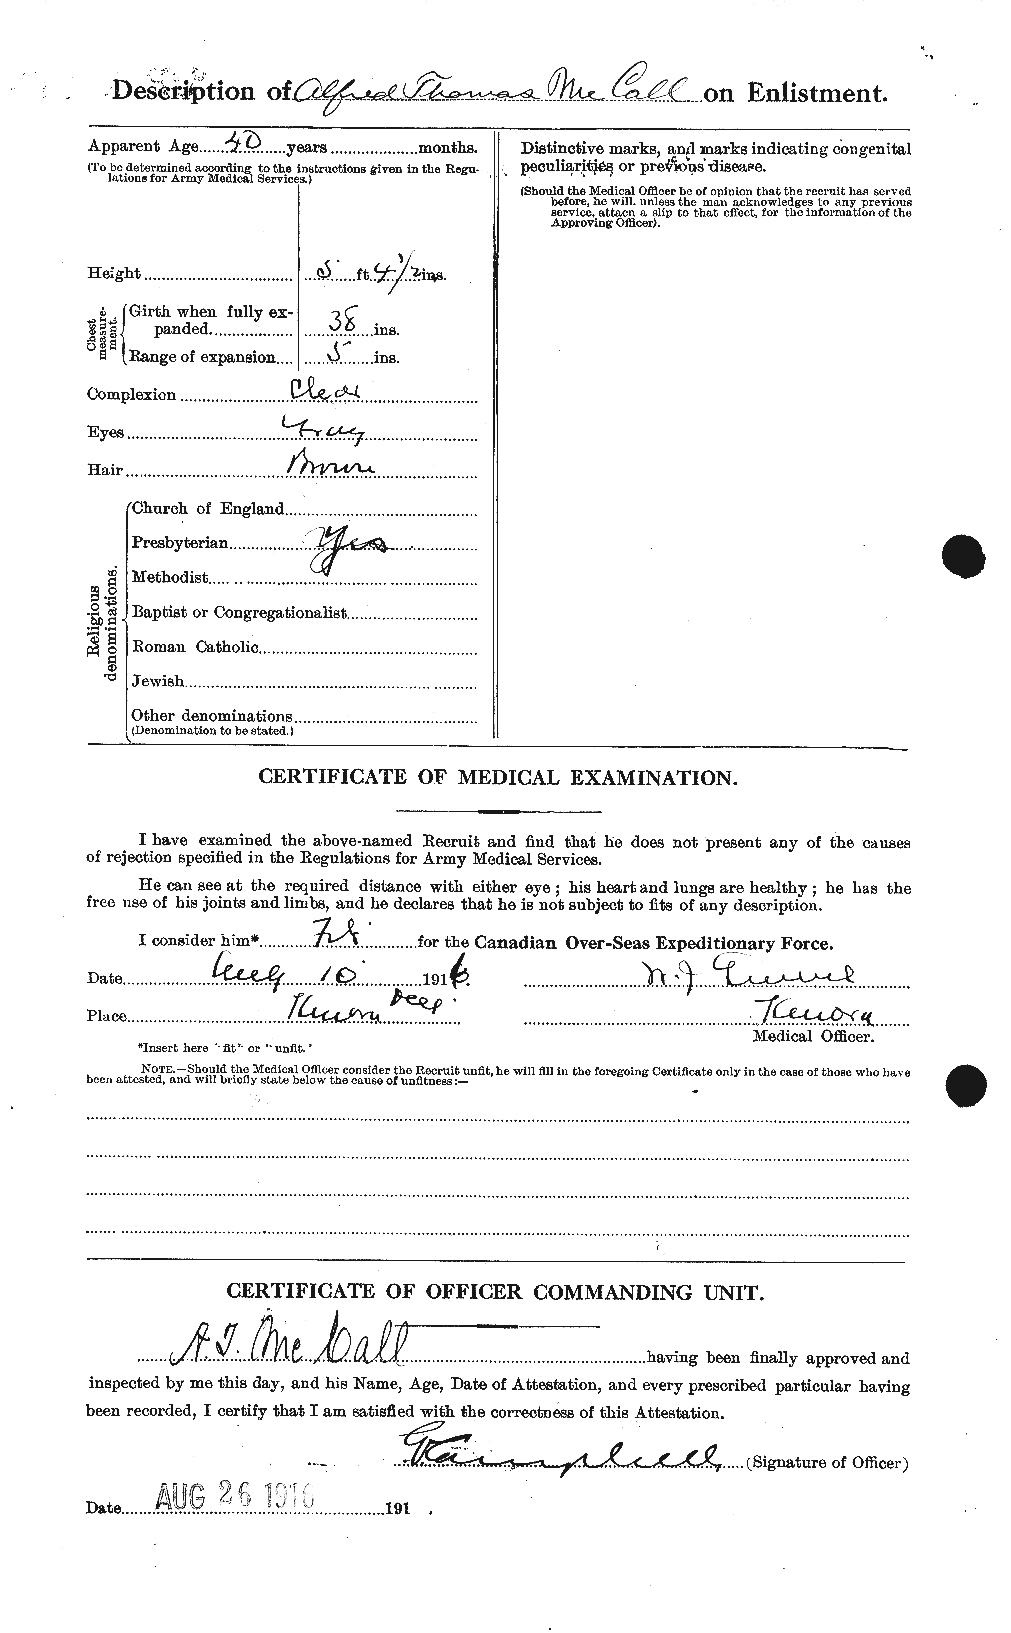 Personnel Records of the First World War - CEF 131971b